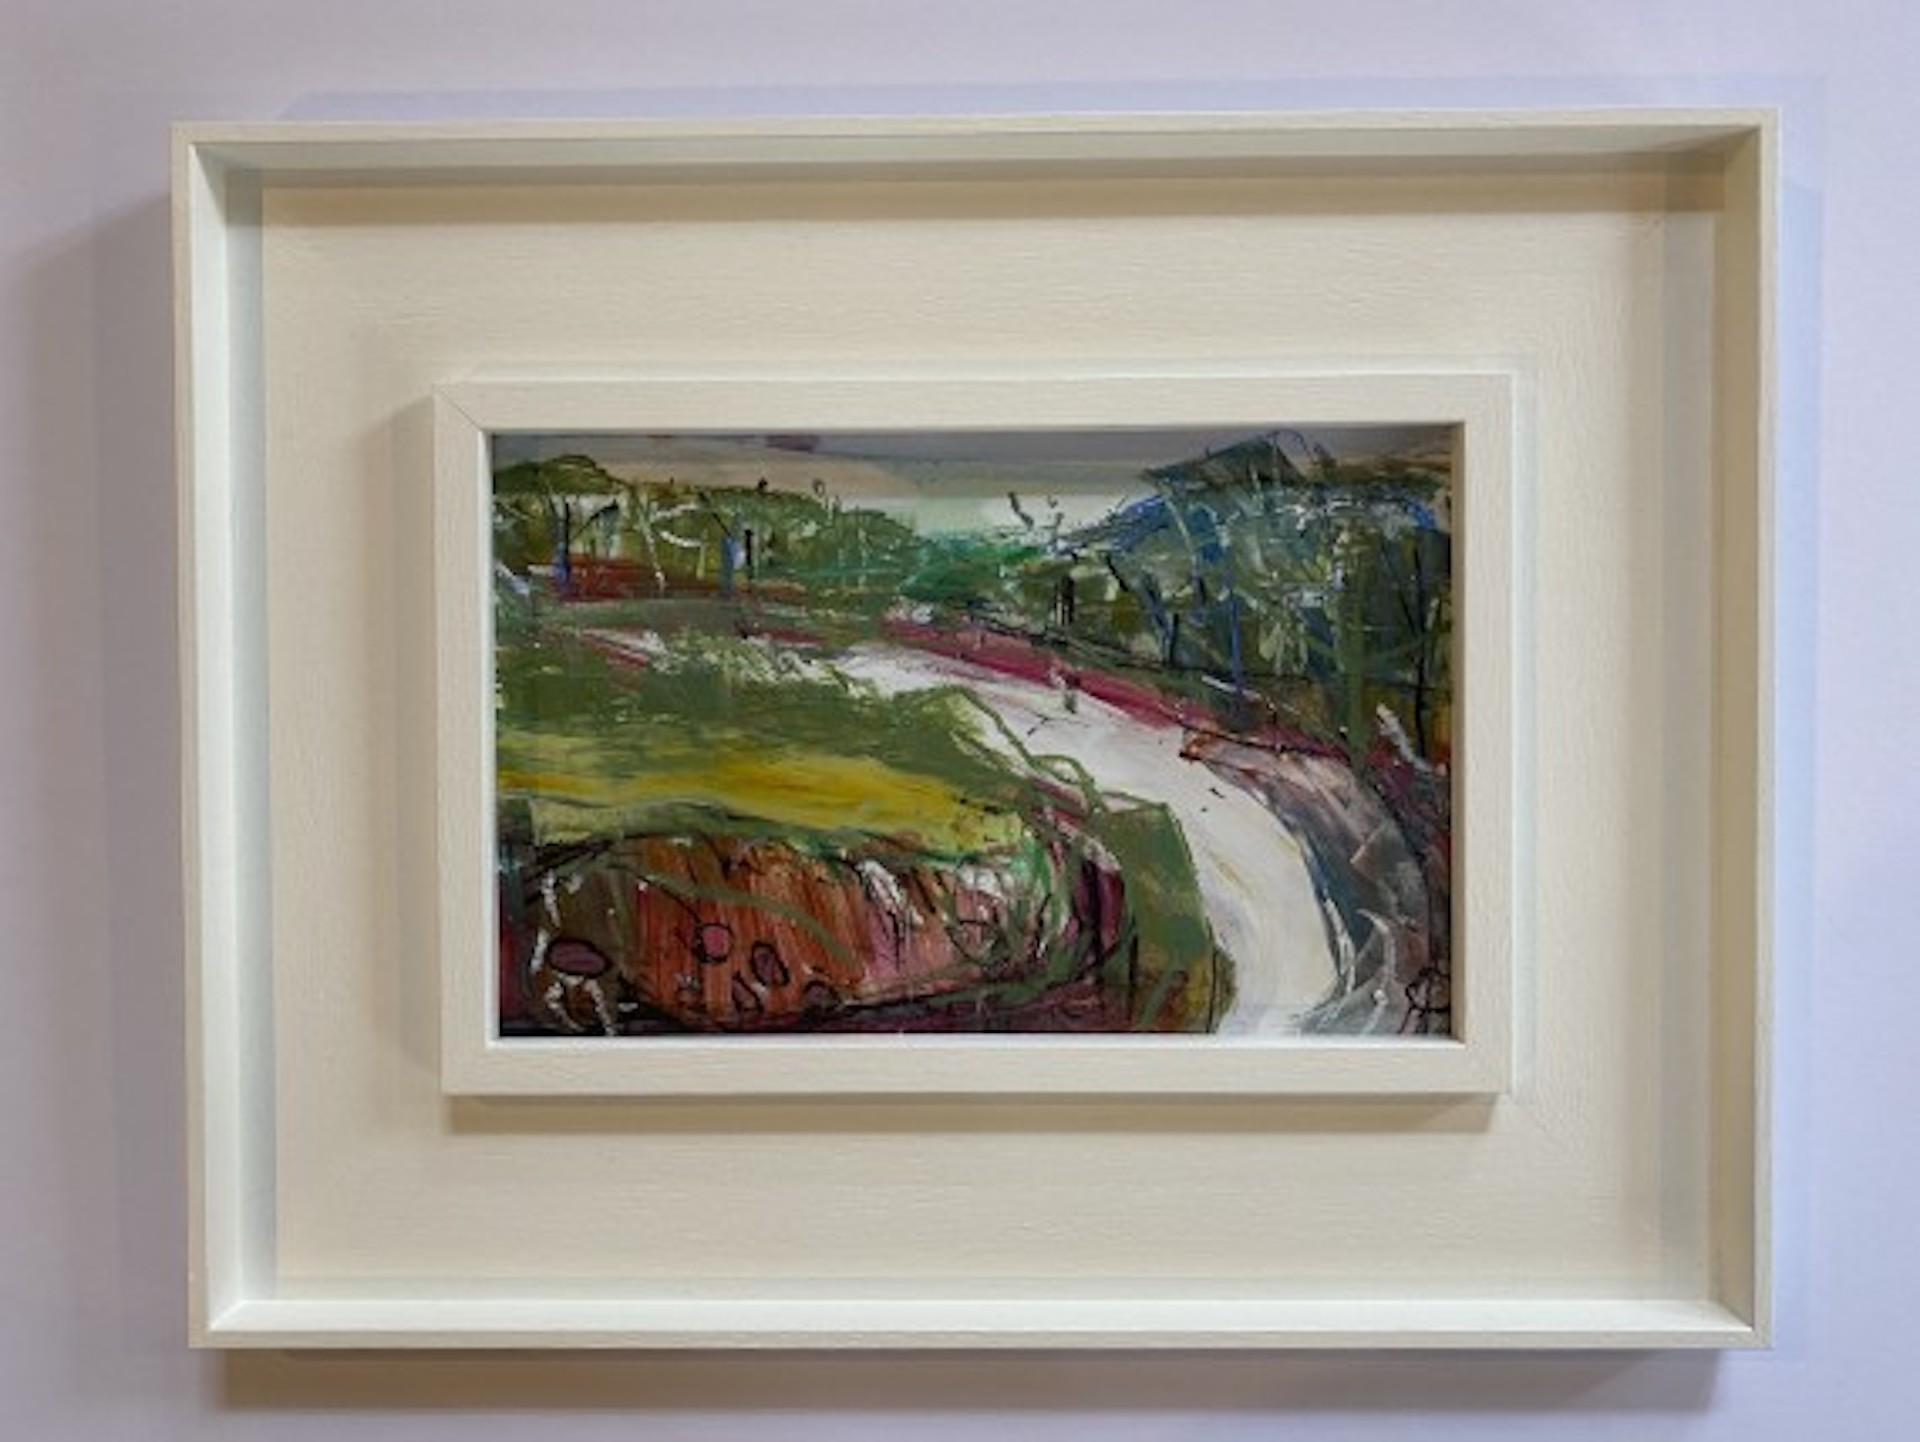 Country Lane II [2021]
Original
Landscape
Mixed media
Image Size: H:18 cm x W:28 cm 
Framed Size: H:35 cm x W:45 cm x D:3cm
Sold Framed
Please note that insitu images are purely an indication of how a piece may look

Country Lane II by Natalie Bird